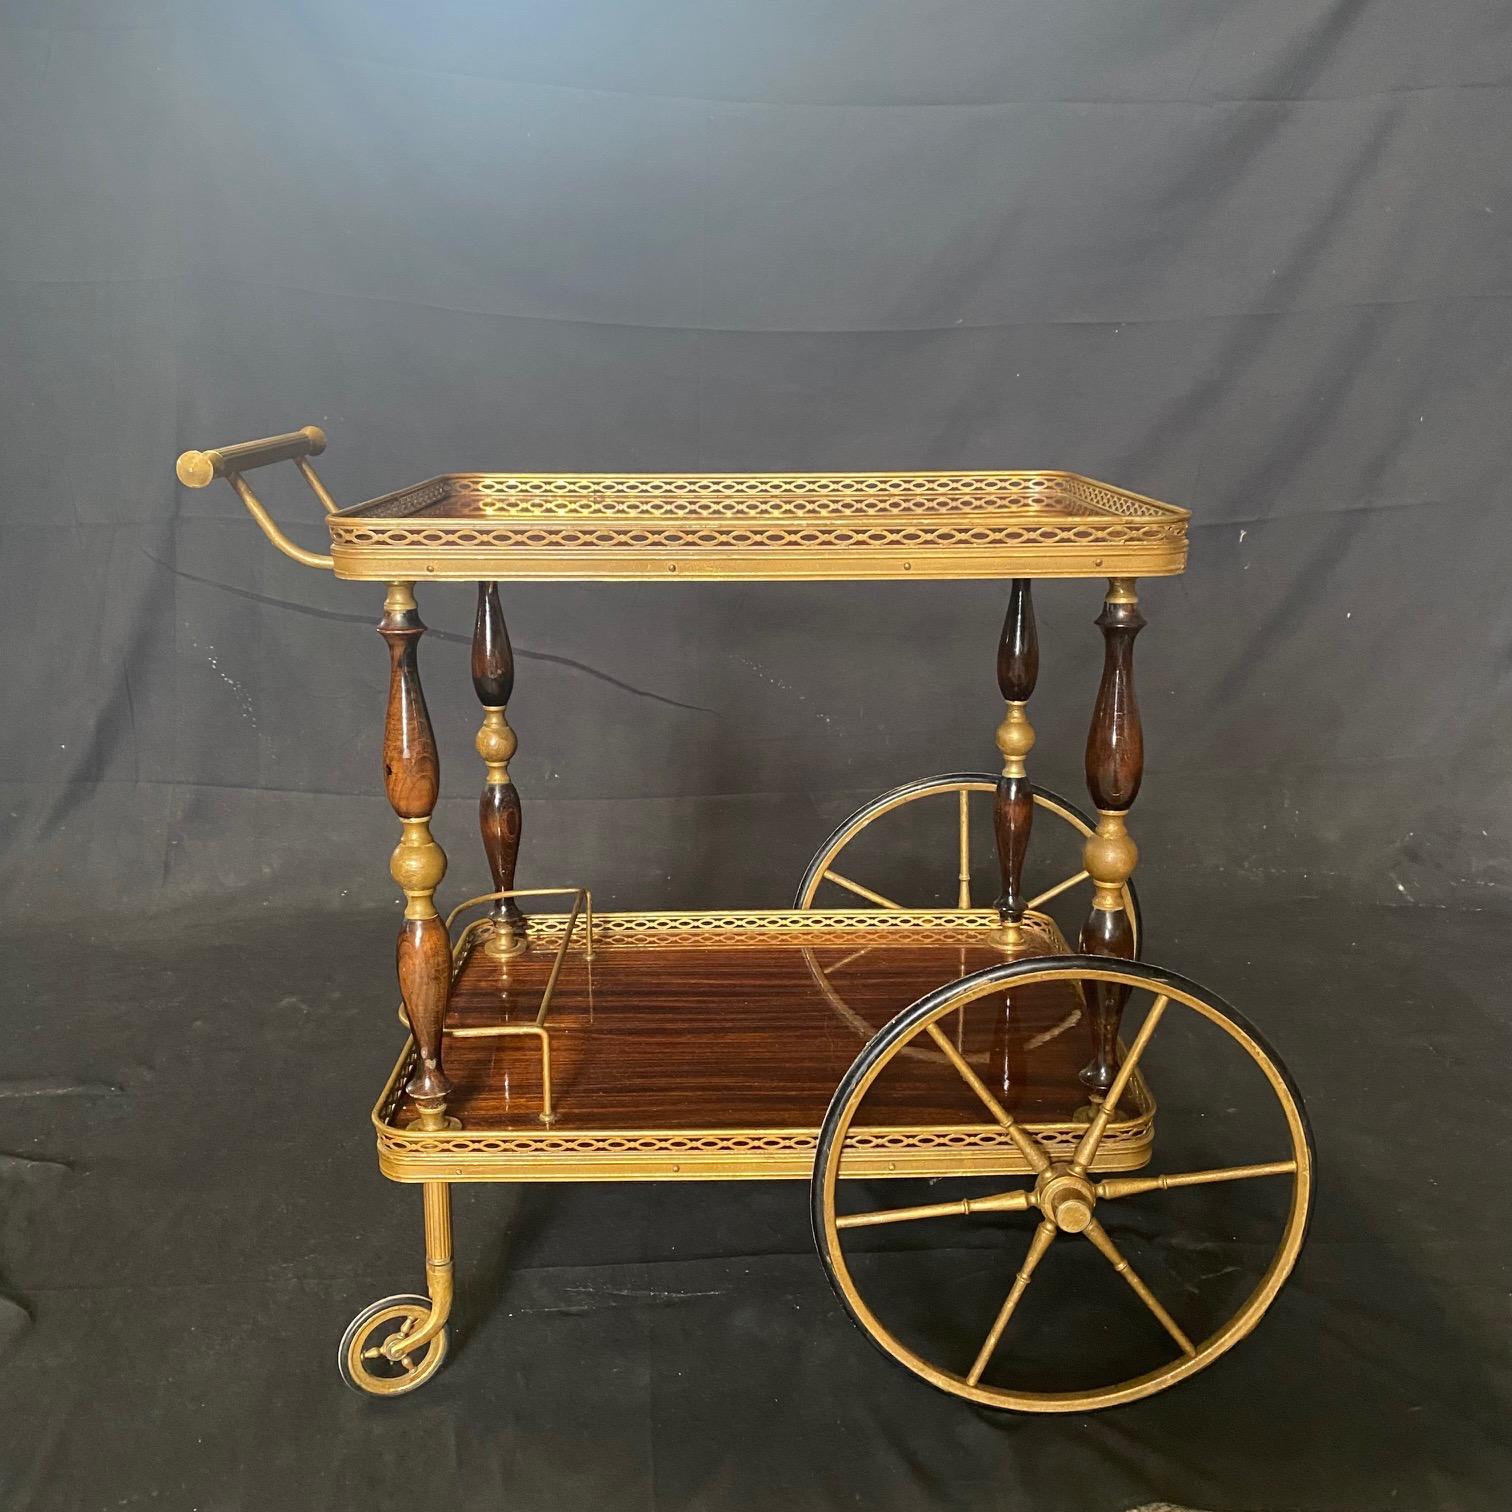 Luxurious French brass bar trolley cart in beautiful neoclassical style from the 1950s. Two formica serving tiers that look like rosewood with a delicate brass decorative edge all around the sides of each tier. The lower tier tray has a brass bottle